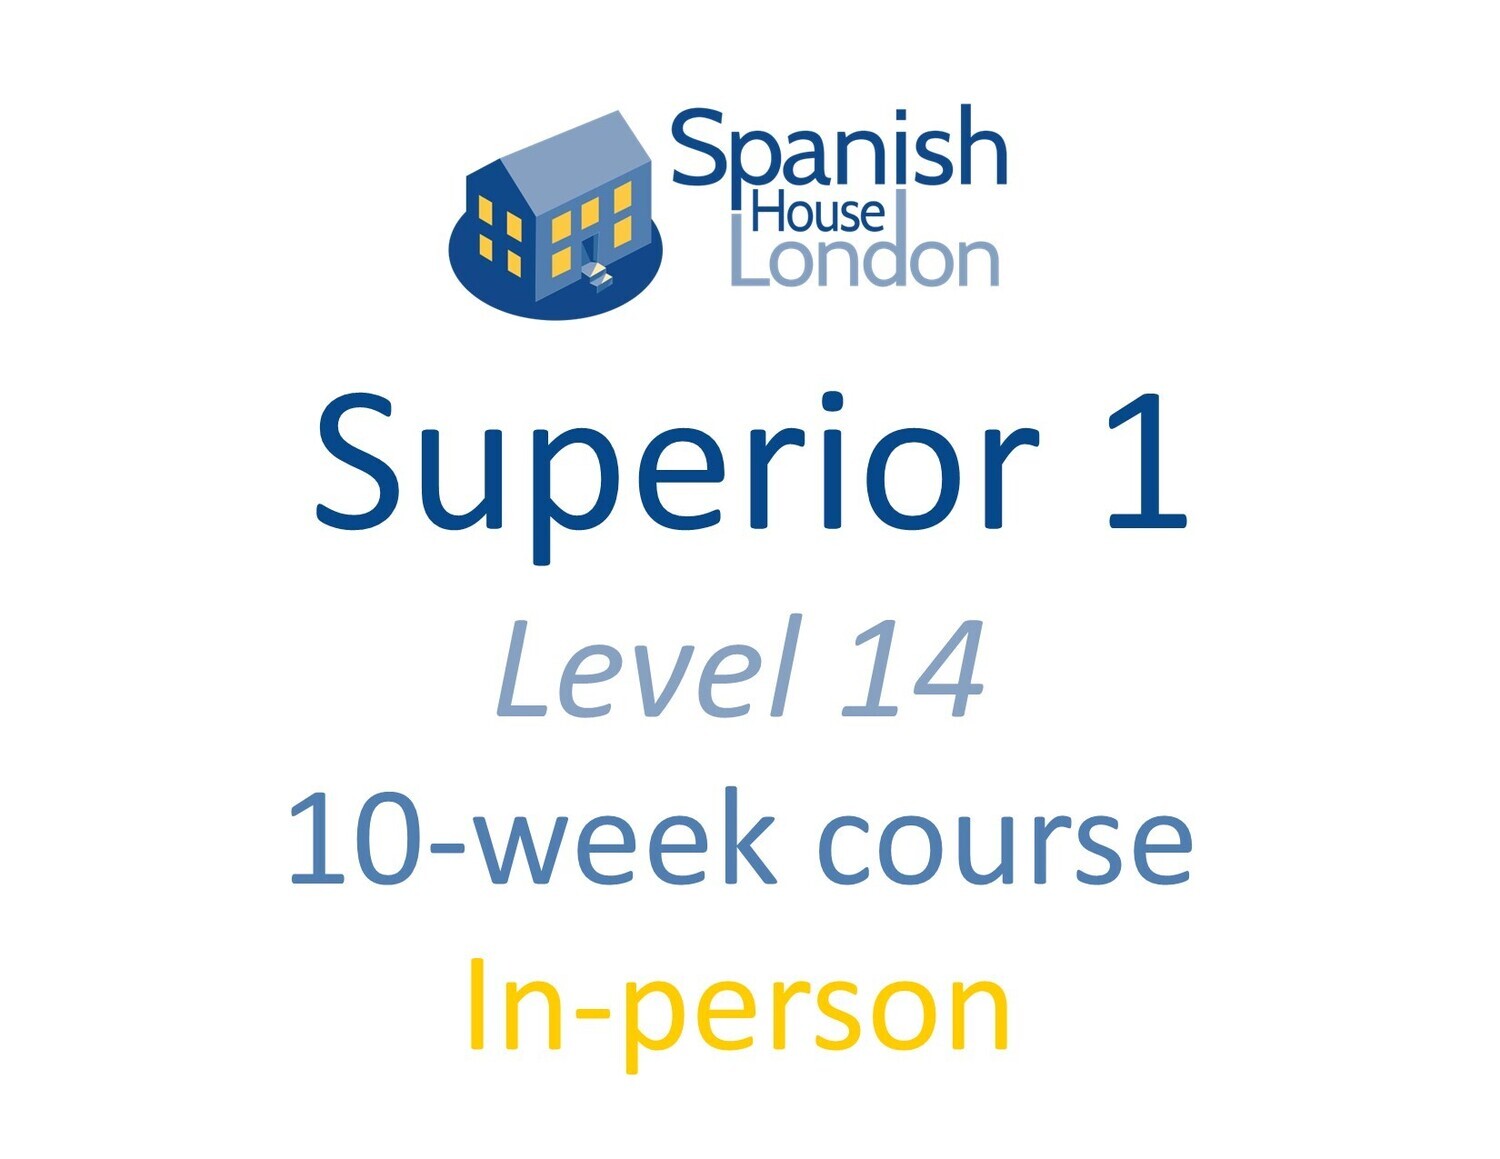 Superior 1 Course starting on 31st July at 7.30pm in Clapham North